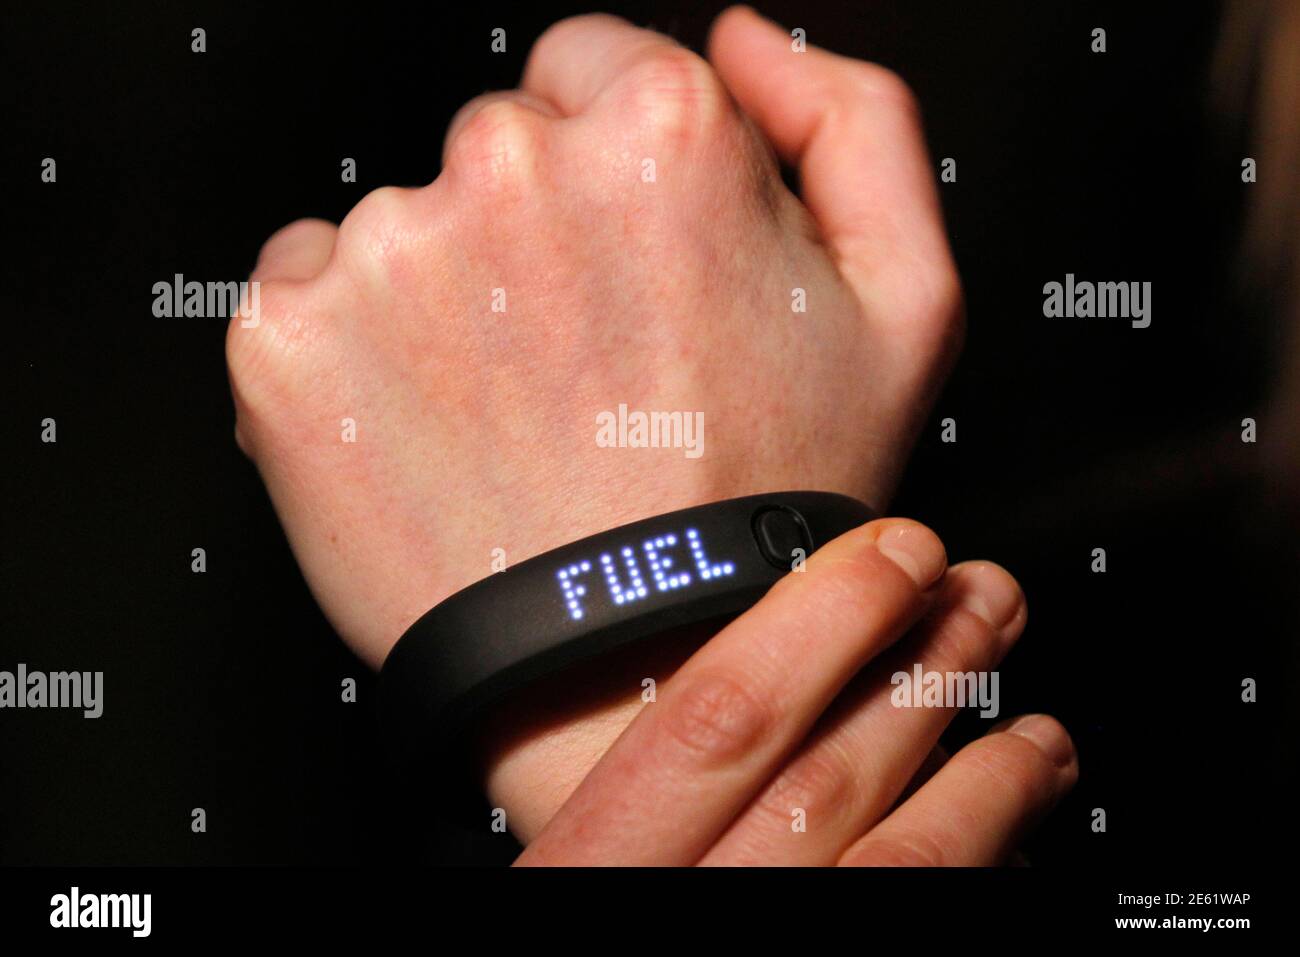 The new NIKE+ FuelBand, an innovative wristband that tracks and measures  everyday movement for what Nike says is to motivate and inspire people to  be more active, is demonstrated by a Nike